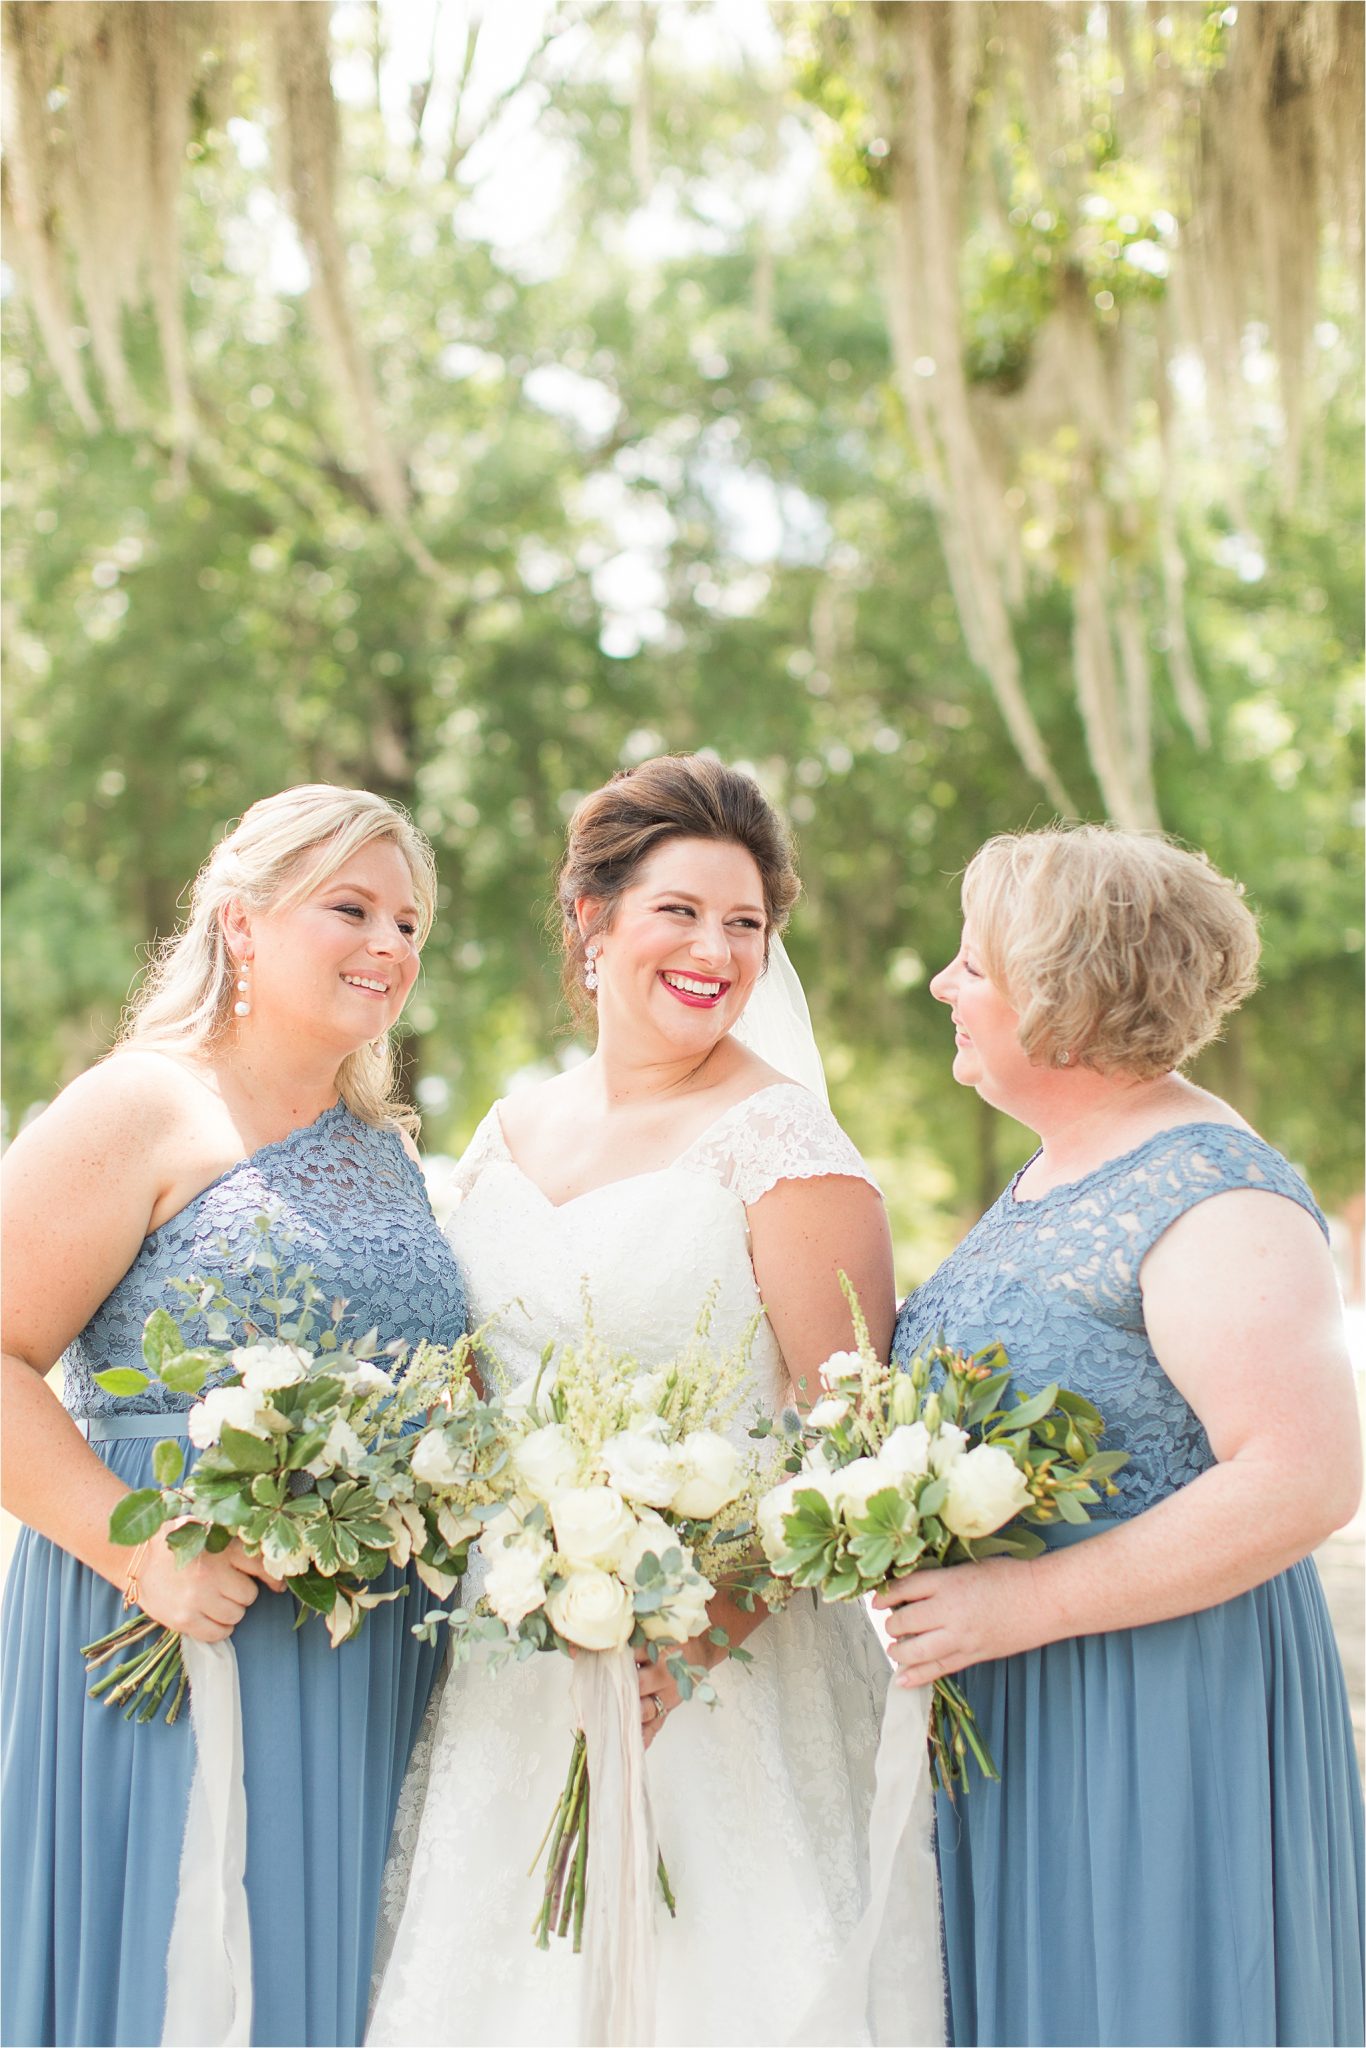 Pastel Themed Wedding-The Chapel at the Waters-Montgomery Alabama Photographer-Miles & Meredyth-Blue Themed Wedding-Alabama Wedding Venue-Wedding Details-Blue Bridesmaids Dresses-Wedding Day Makeup 